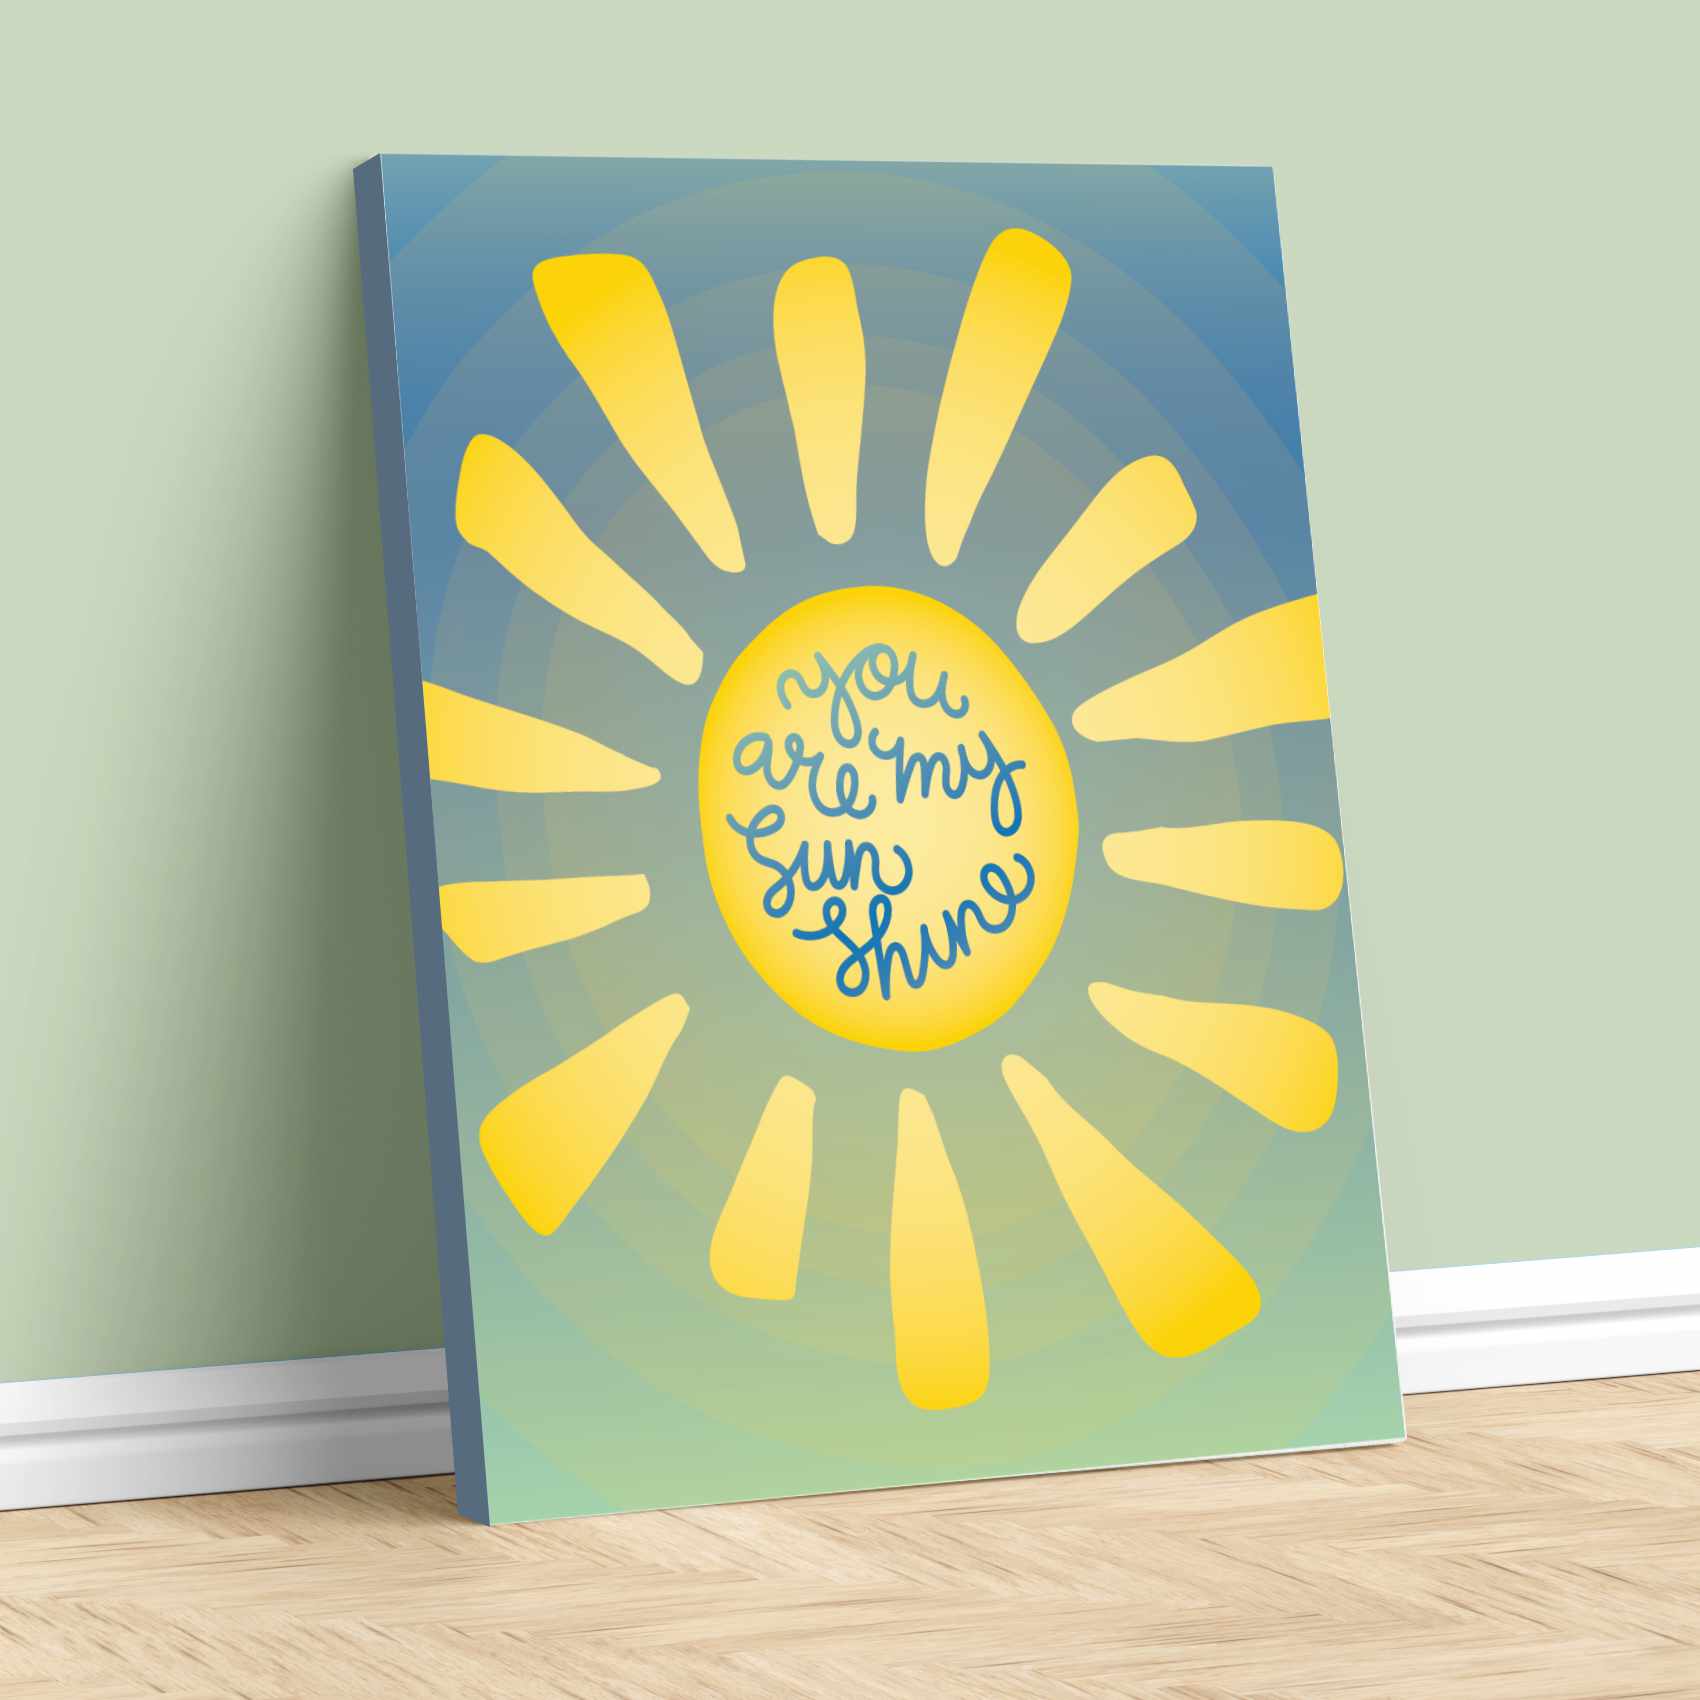 You are My Sunshine - Song Lyric Poster Art Kids Playroom Song Lyrics Art Song Lyrics Art 11x14 Canvas Wrap 